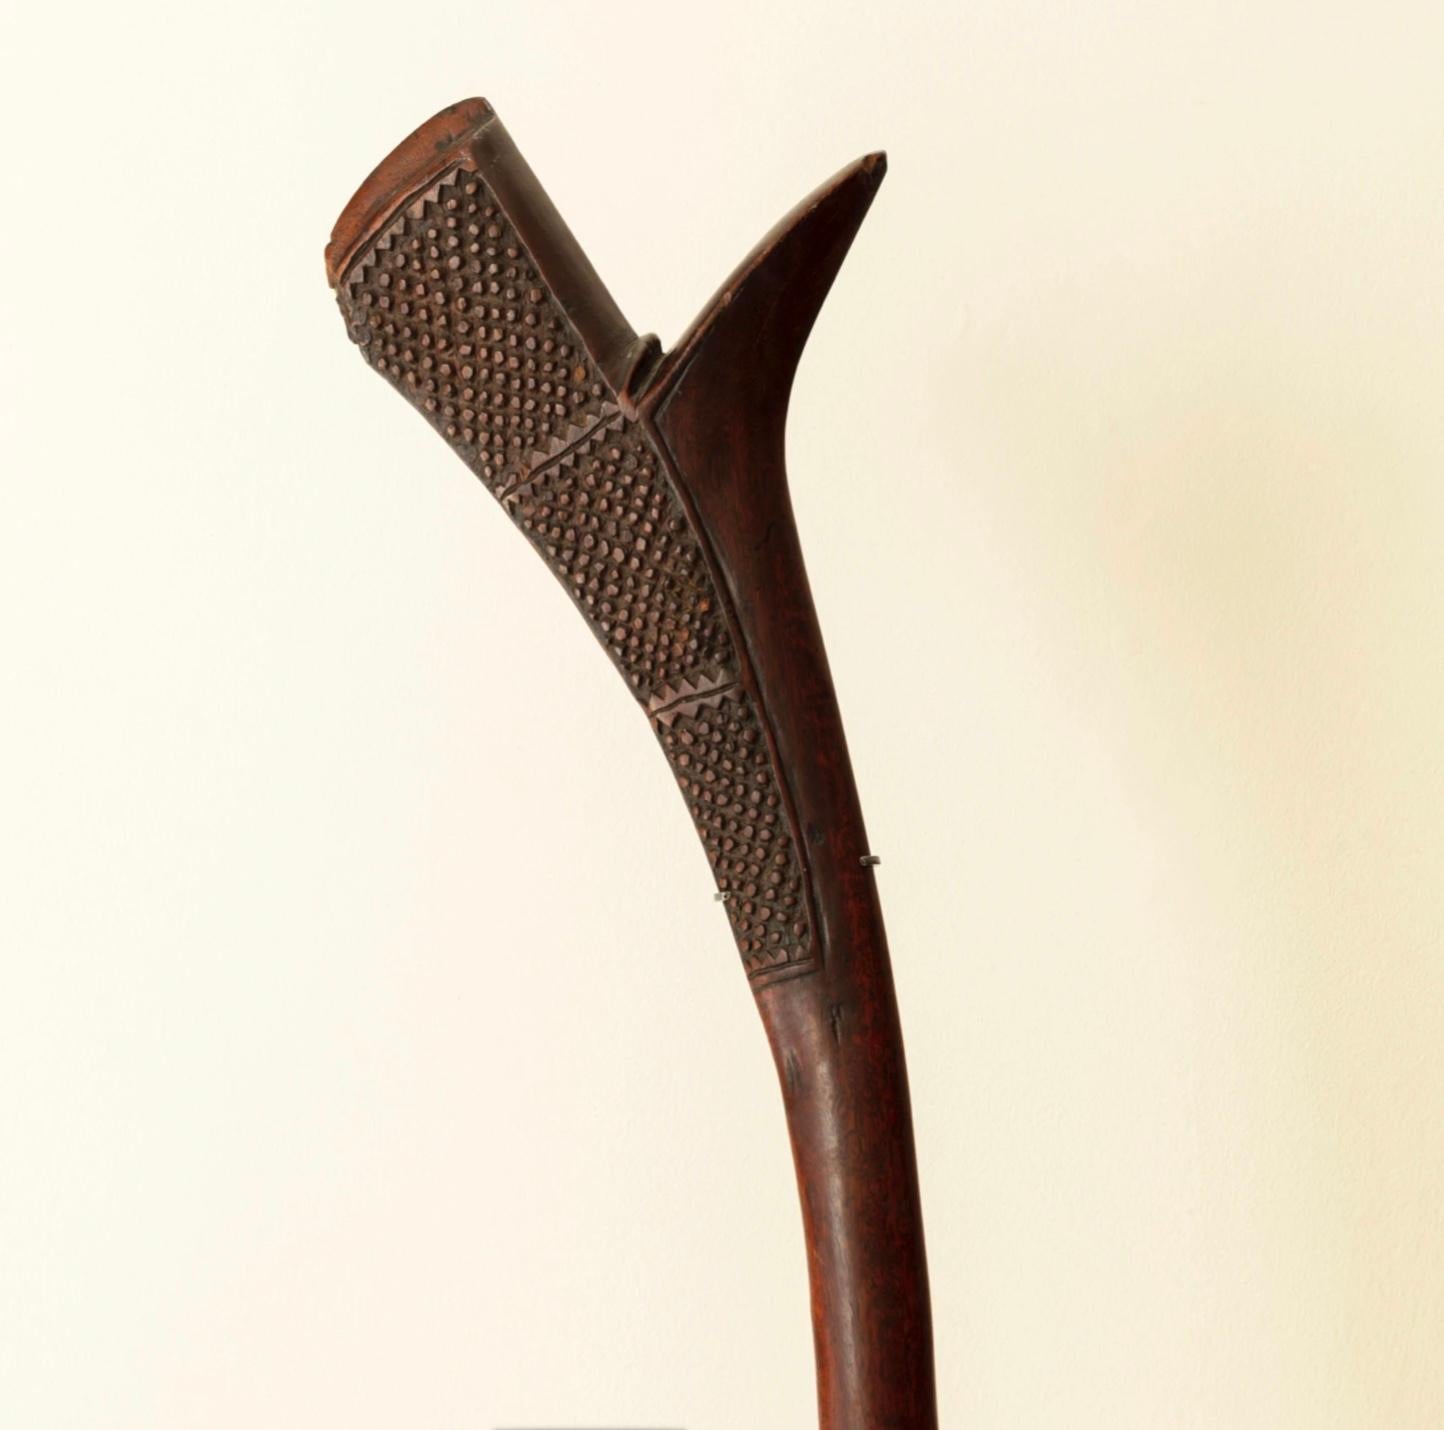 Gunstock shaped war club ‘Sali’. Ironwood root carved with traditional motifs. An excellent example, mounted on a custom stand in patinated bronze.

Measures: Height 44cms on stand.

Fiji, late 19th century.